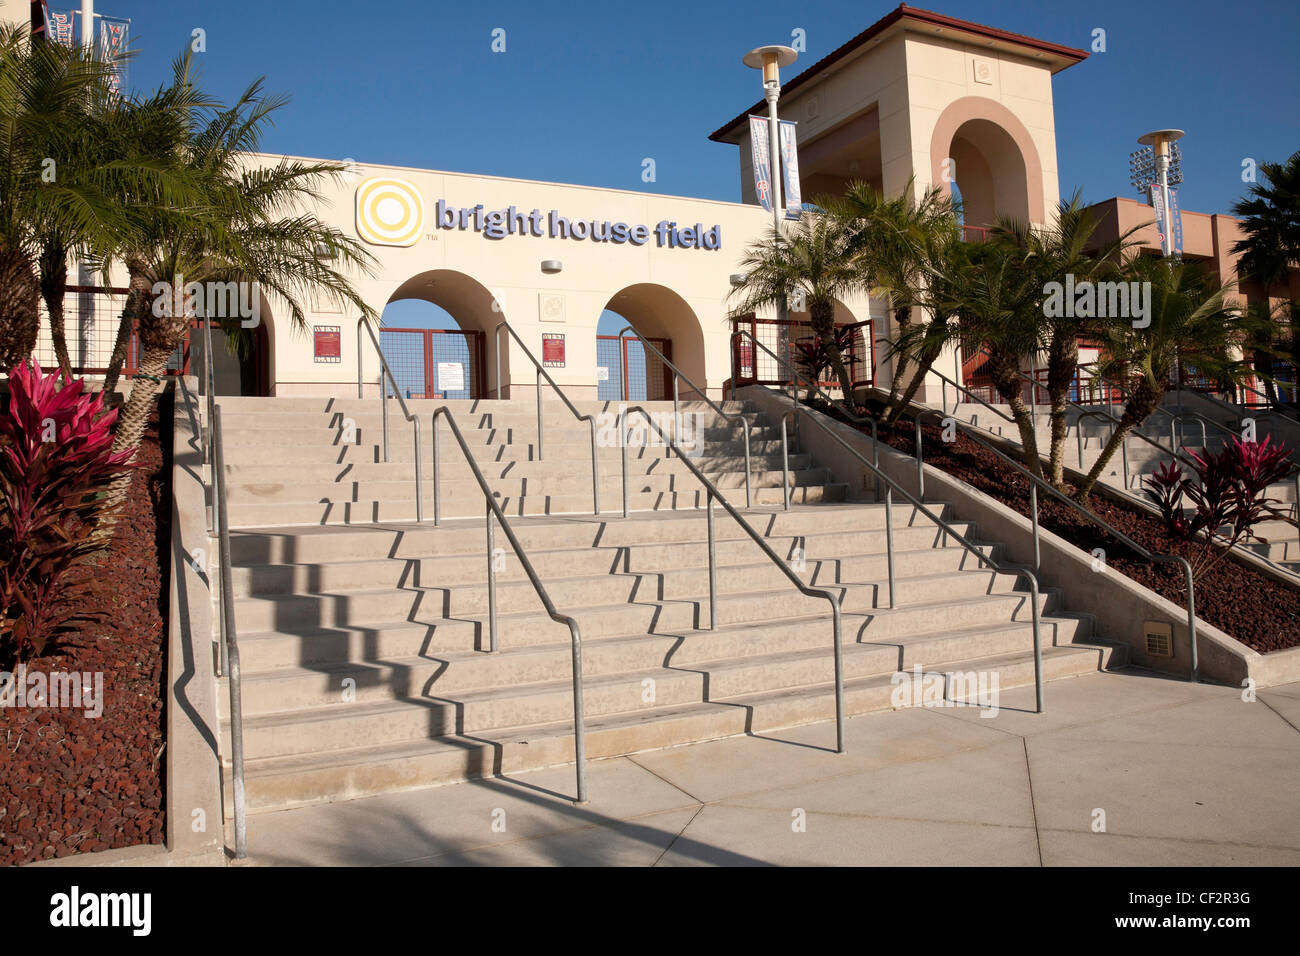 Bright House Field, Clearwater, FL, USA Stock Photo